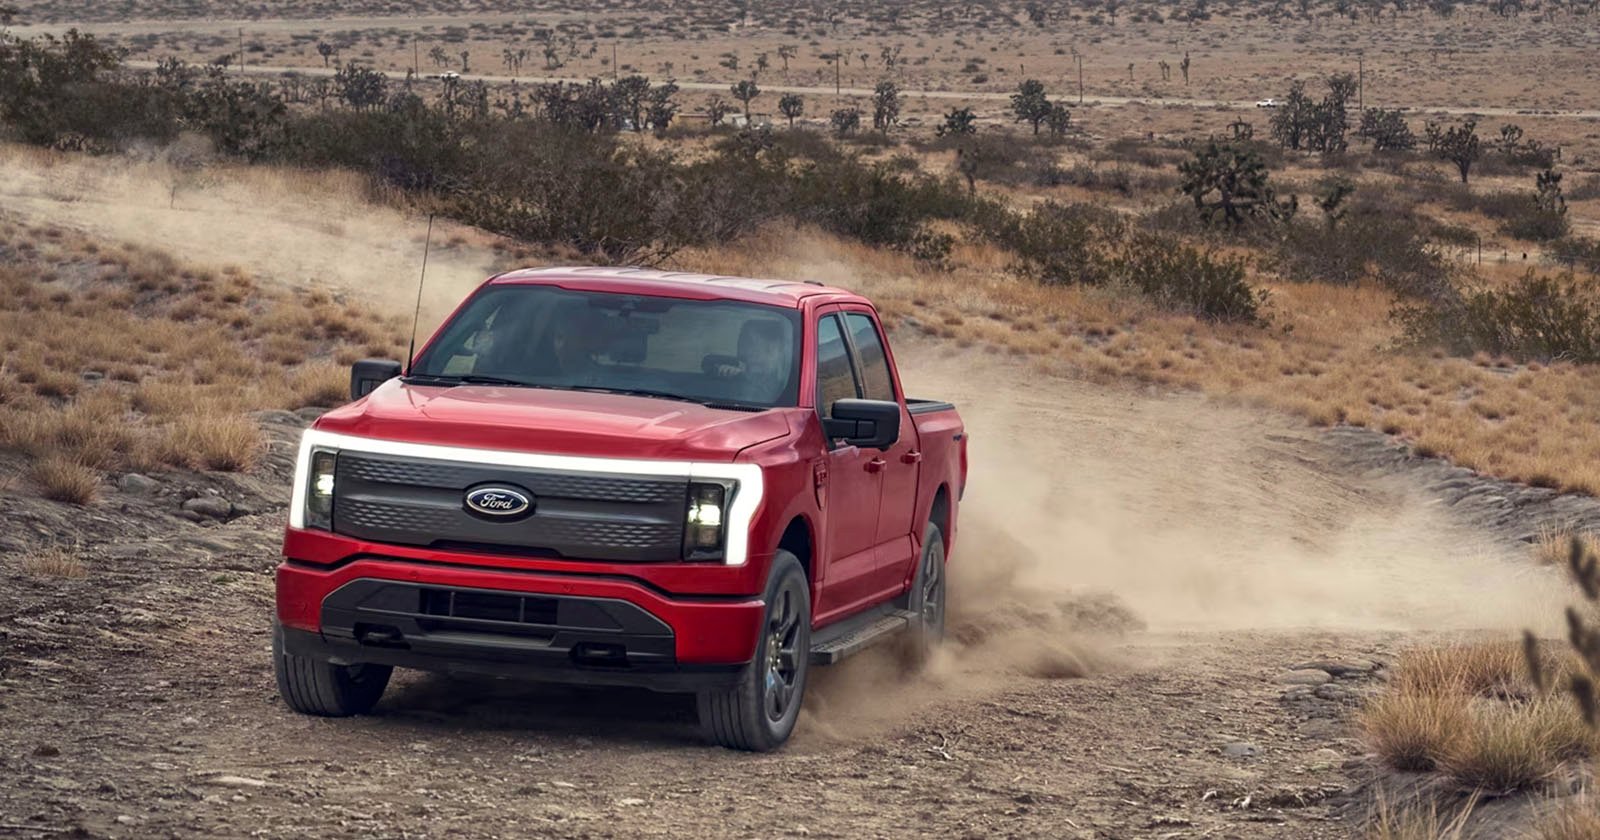 Ford Wants to Turn Its Vehicles into Photography Assistants